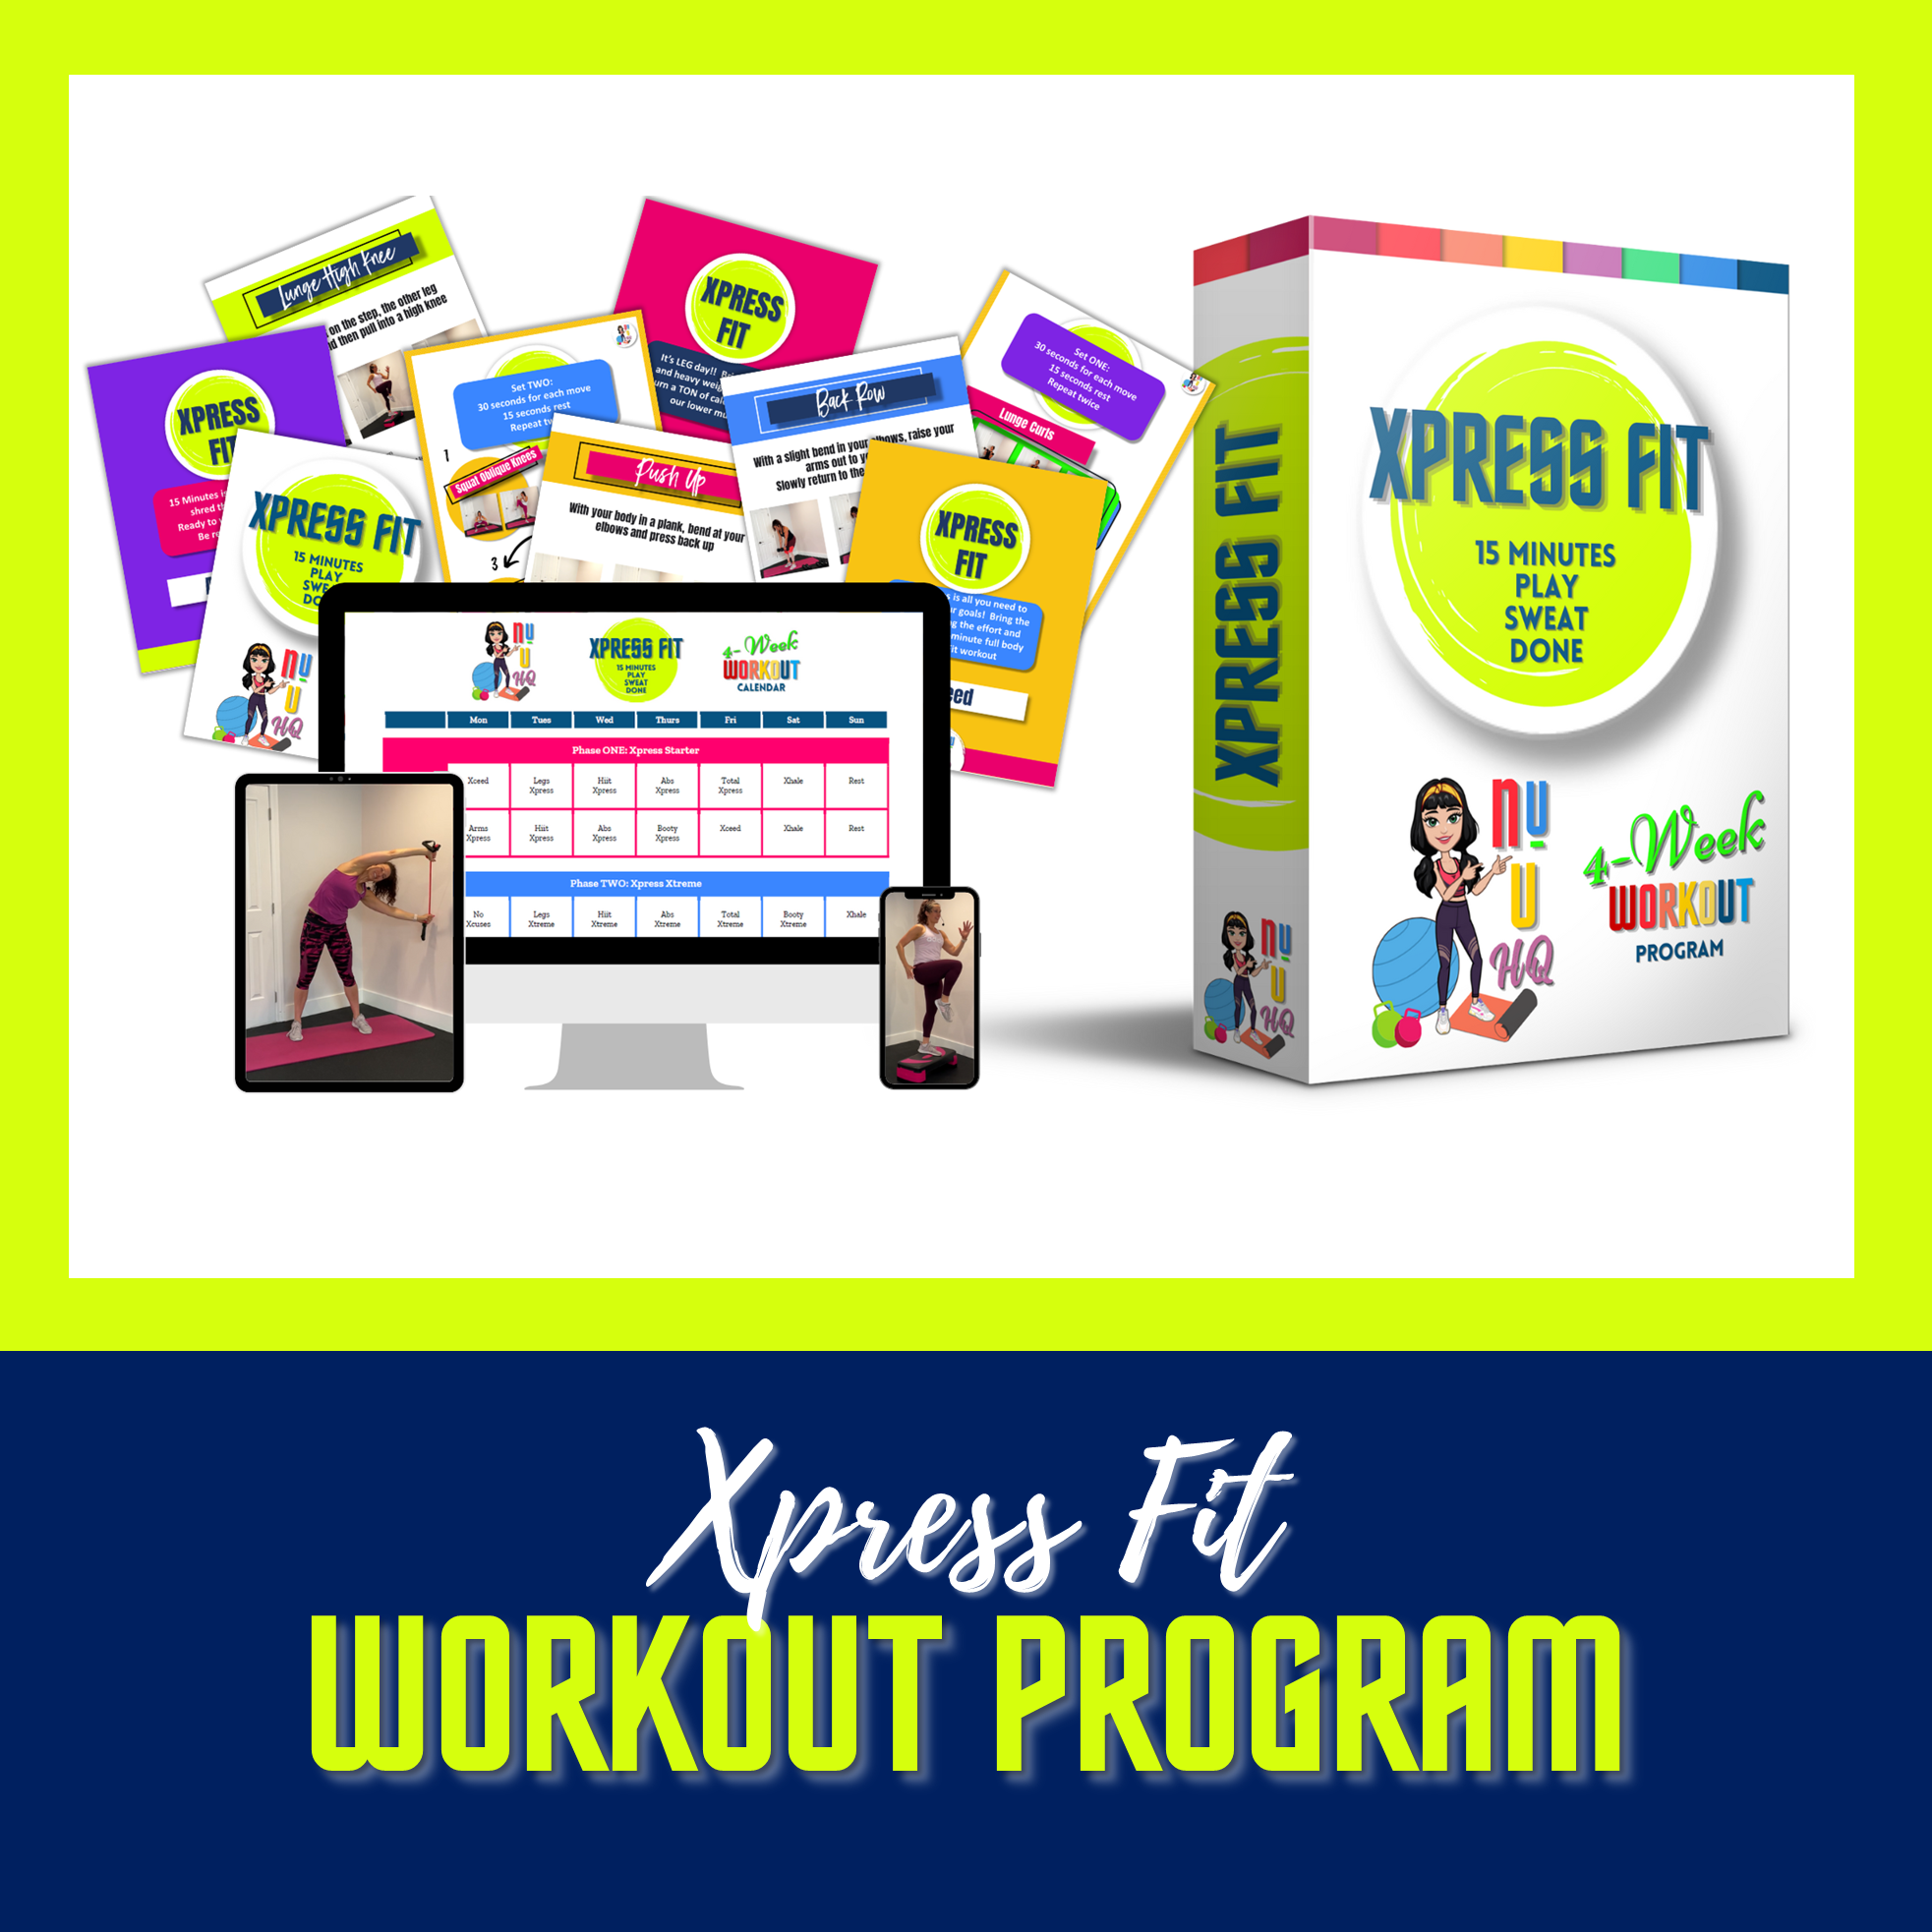 Xpress Fit A 4-week program designed to target your whole body in just 15 minutes a day